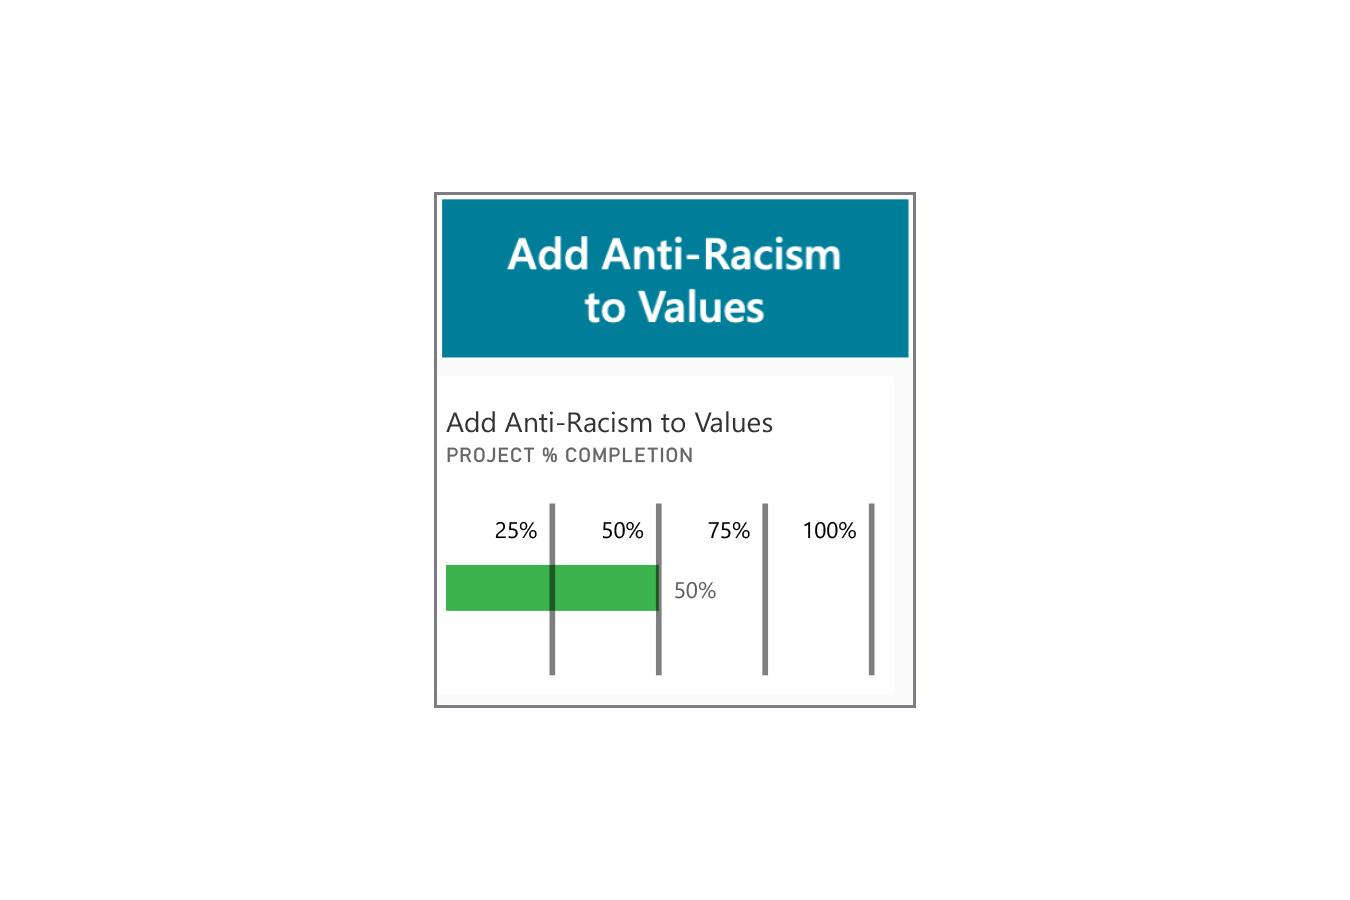 add anti-racism to values infographic